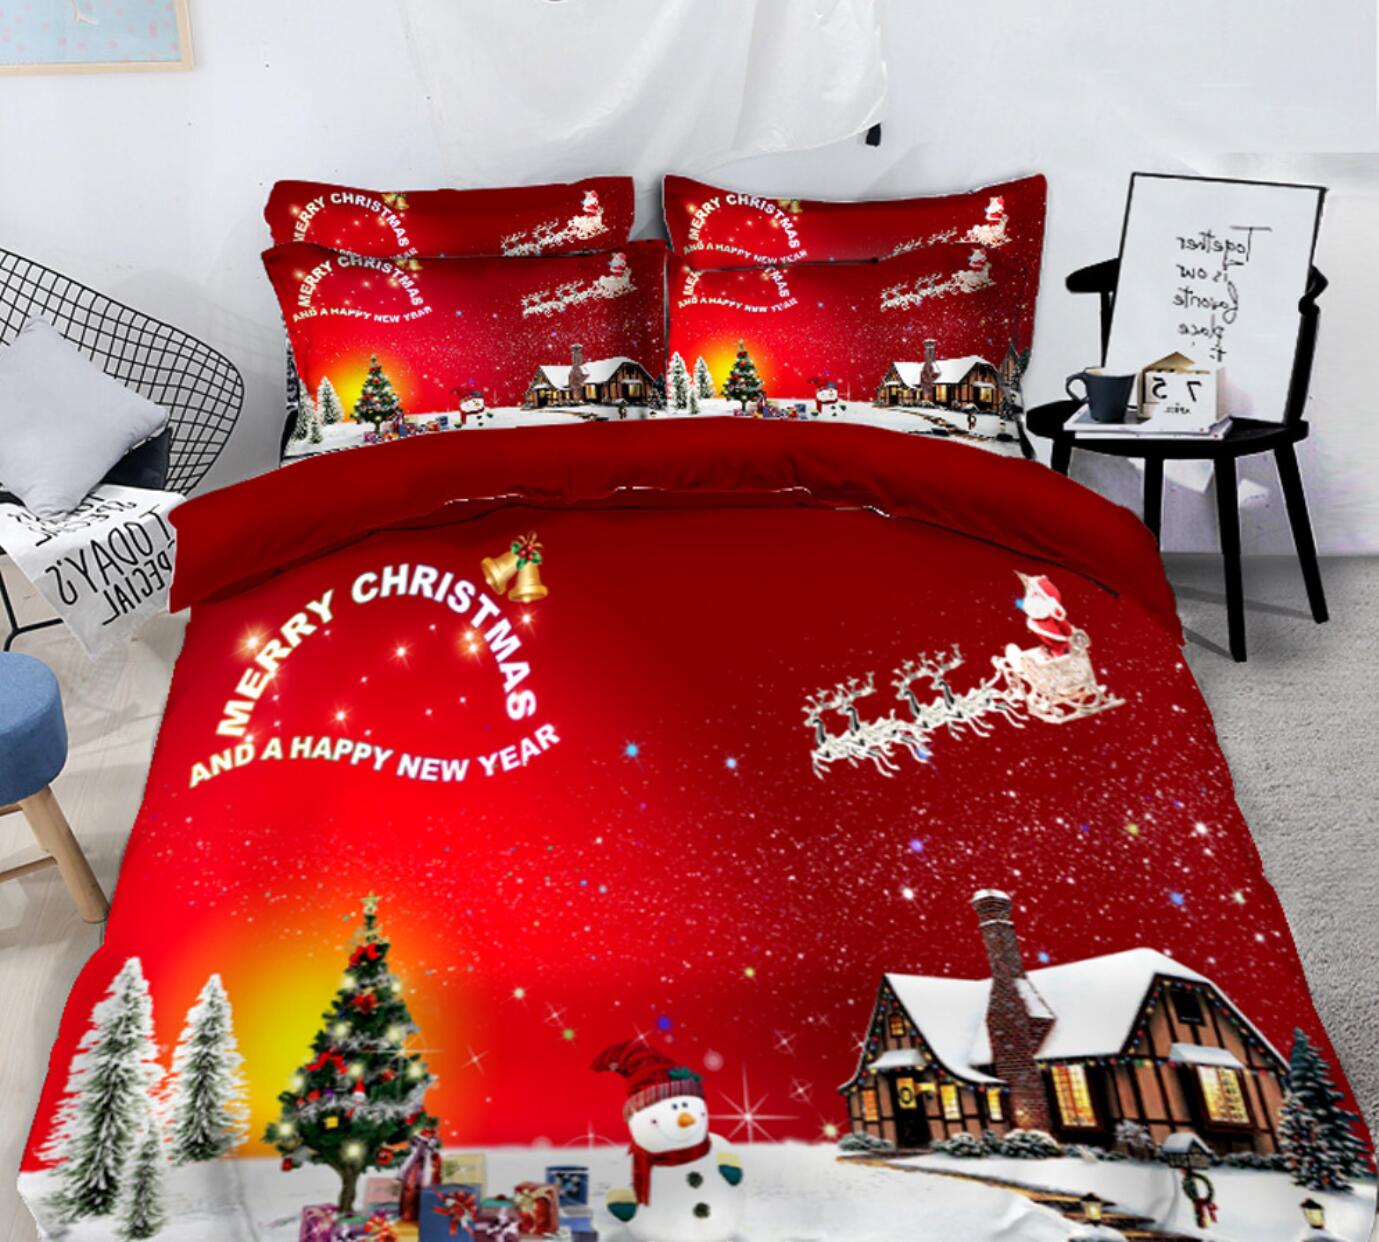 3D Snow House Tree 32026 Christmas Quilt Duvet Cover Xmas Bed Pillowcases